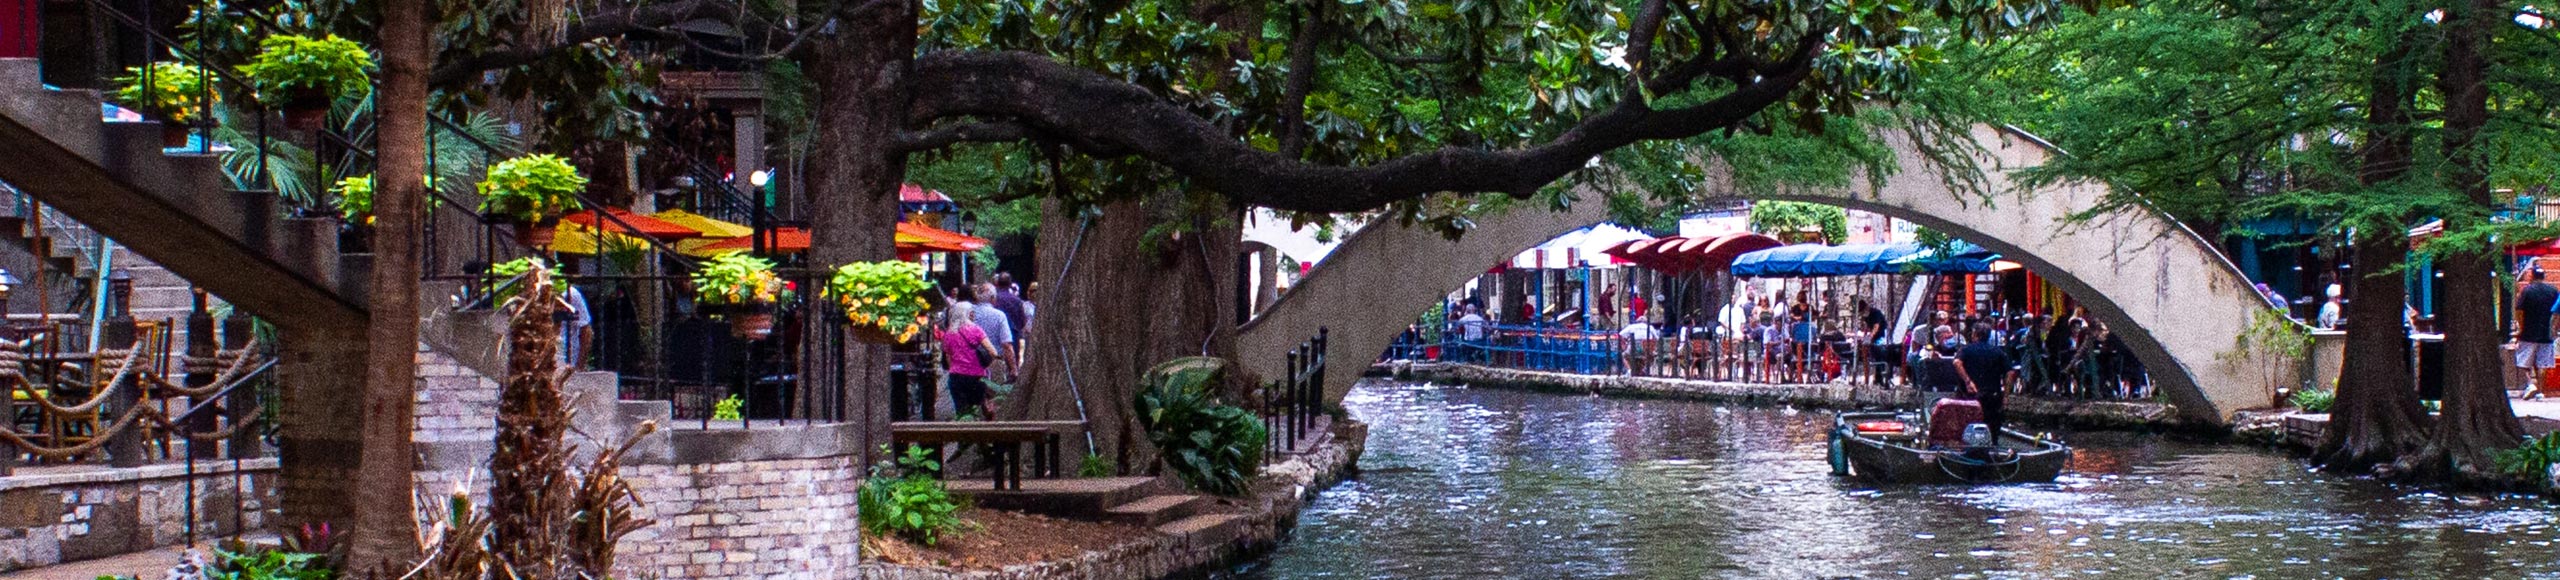 Panoramic image of the Riverwalk in San Antonio, which is home to Dr. Kristin Lewis of MOVES mobile veterinary specialists